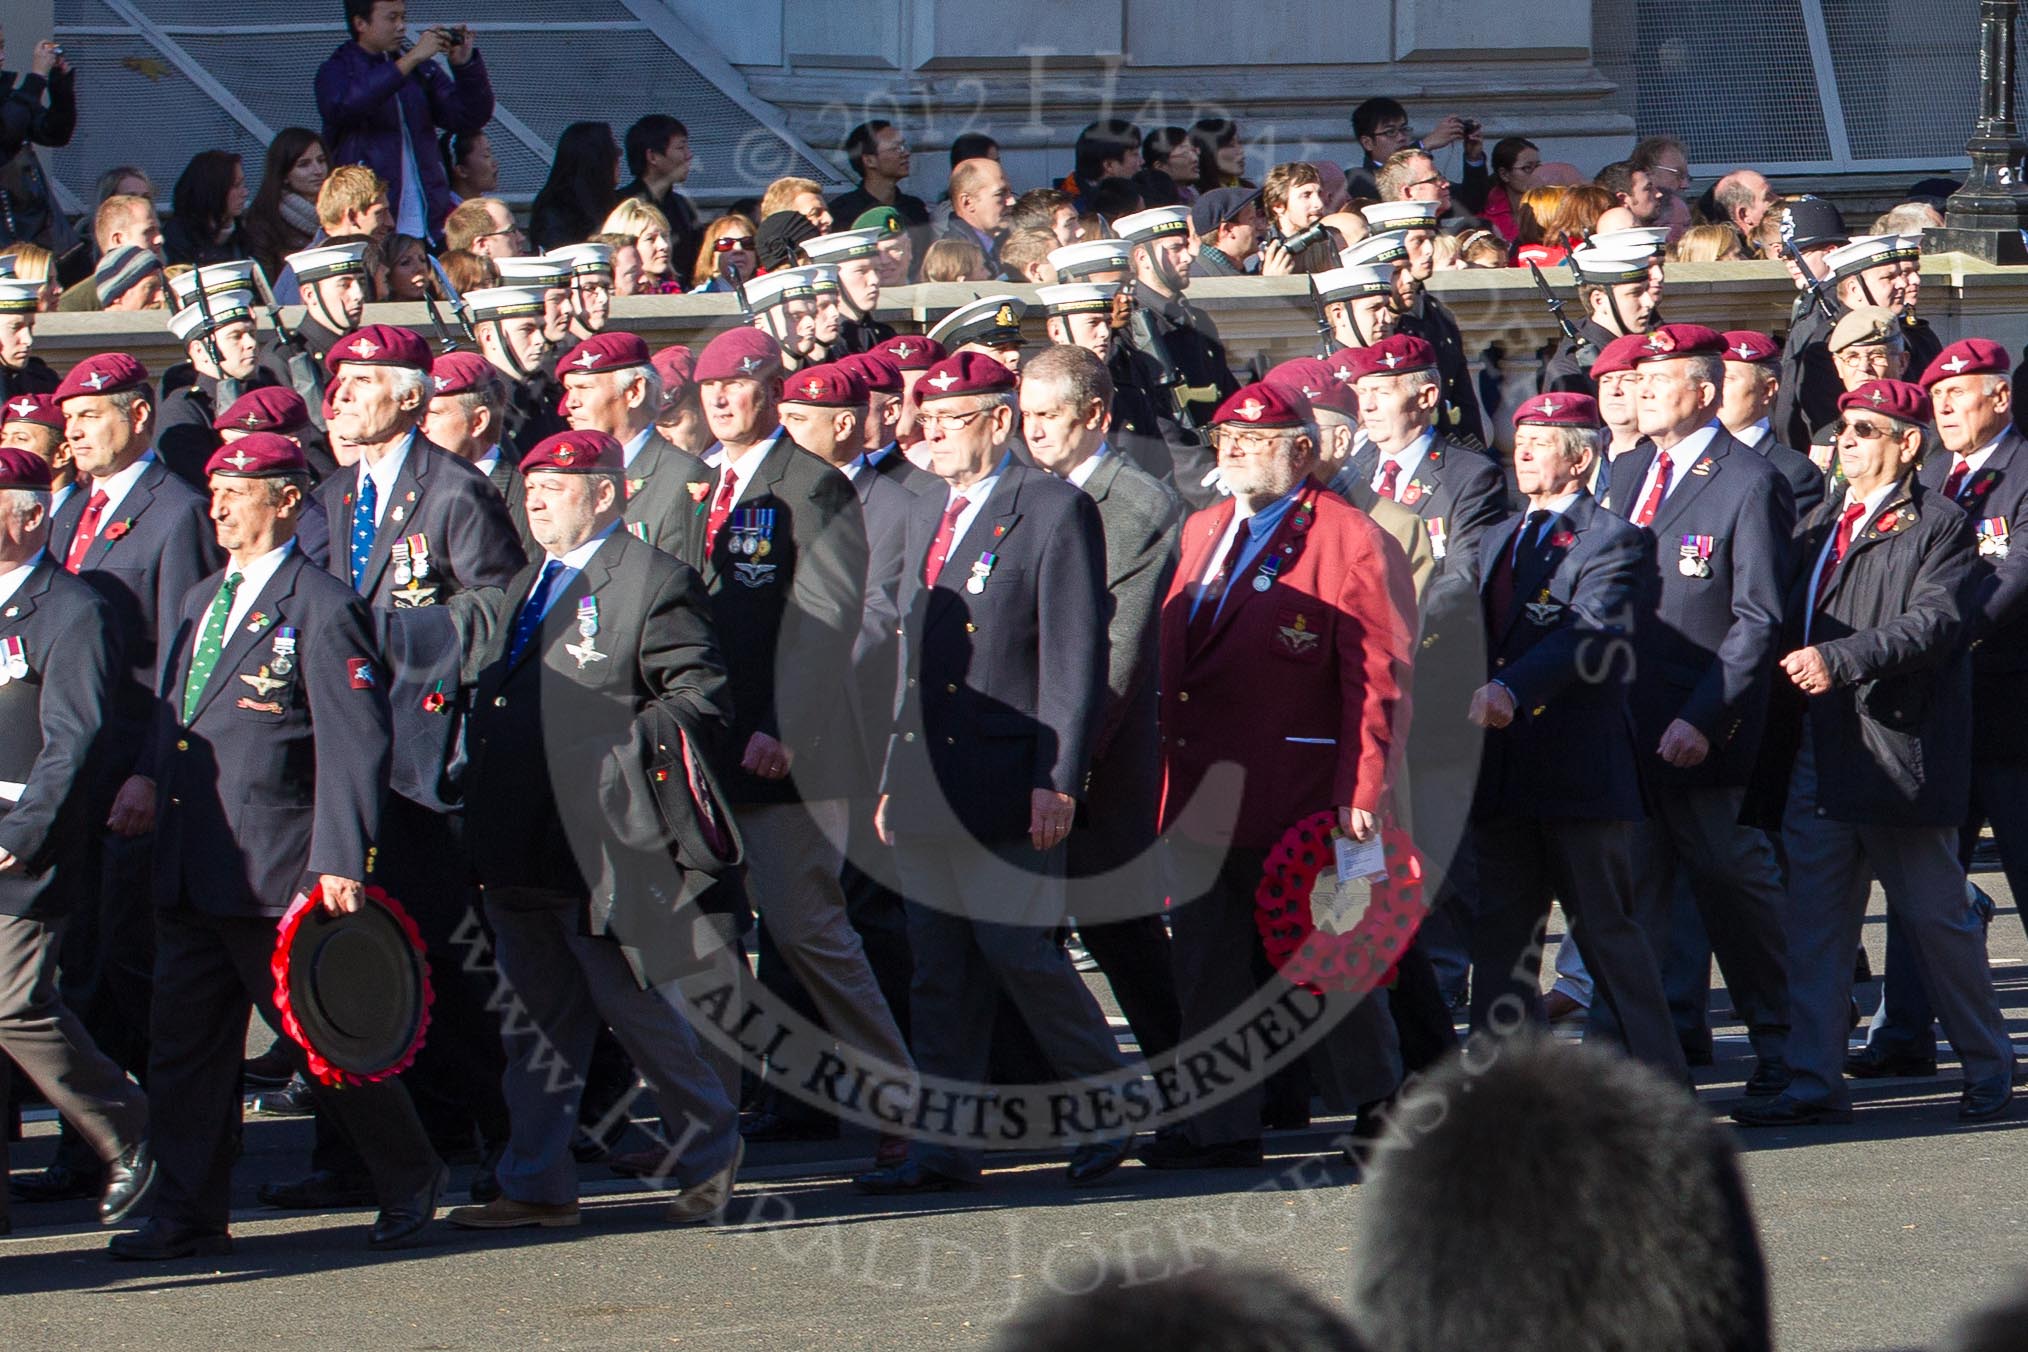 Remembrance Sunday 2012 Cenotaph March Past: Group A20 - Parachute Regimental Association..
Whitehall, Cenotaph,
London SW1,

United Kingdom,
on 11 November 2012 at 11:51, image #692